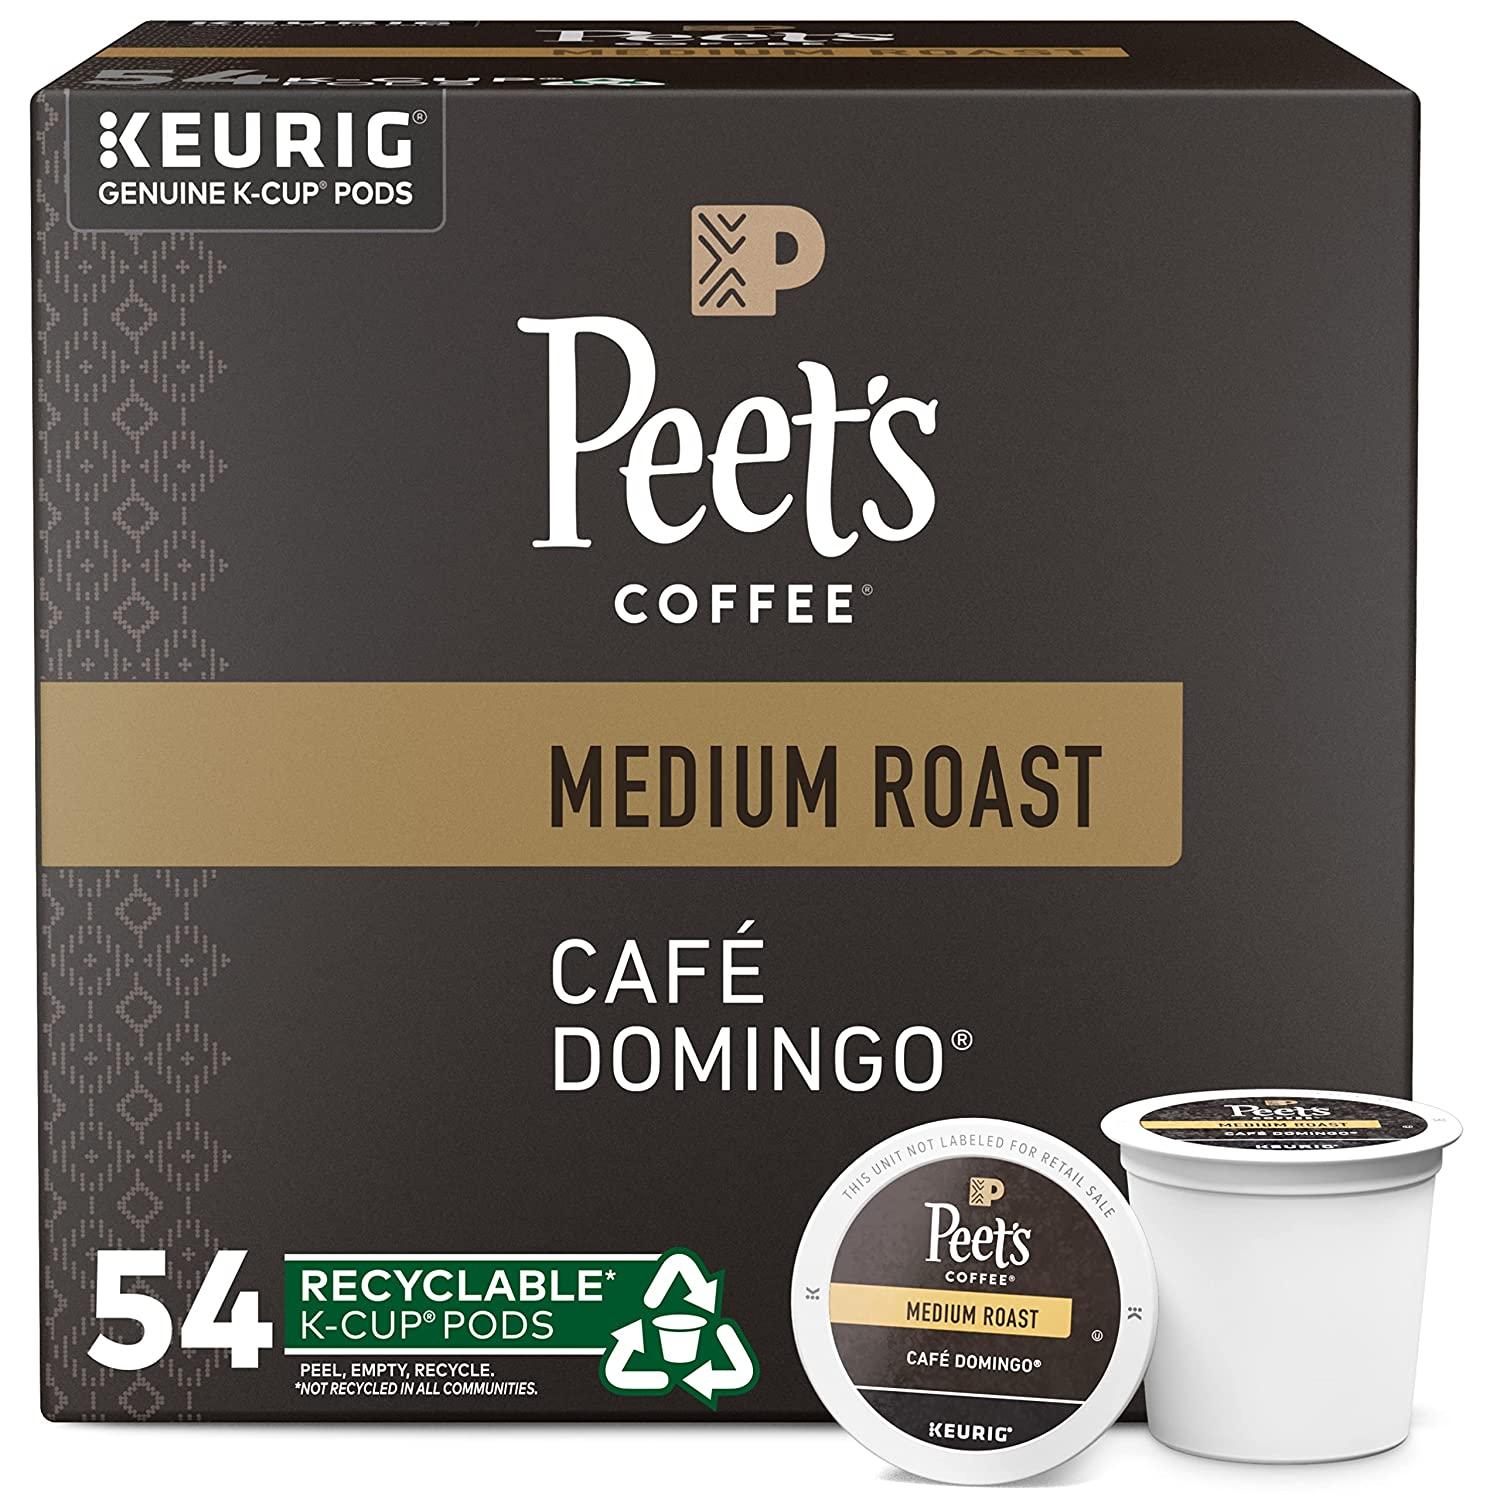 Peets Coffee Medium Roast Cafe Domingo K-Cup Pods 54 Count for $27.57 Shipped